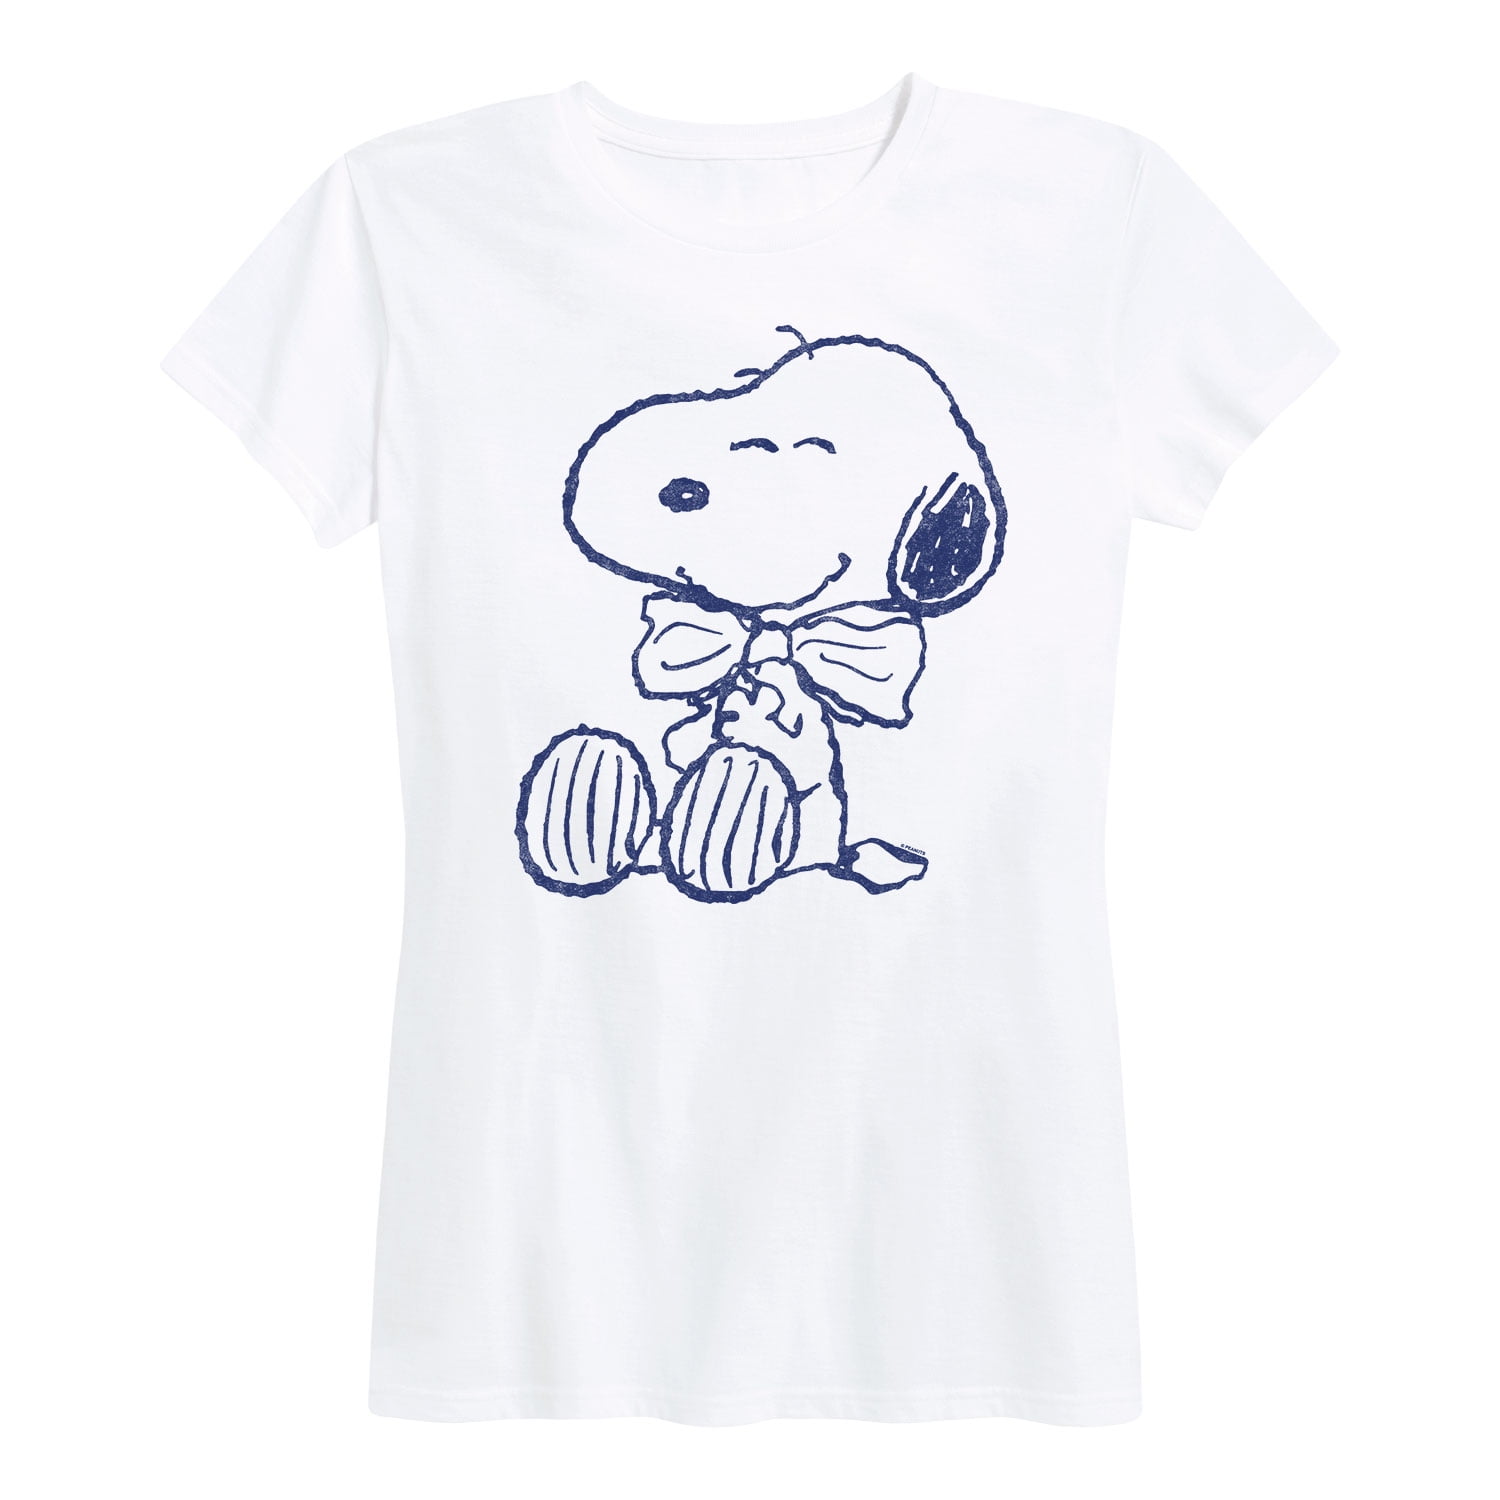 Faces Graphic - Peanuts Sleeve T-Shirt Women\'s - of Short Snoopy